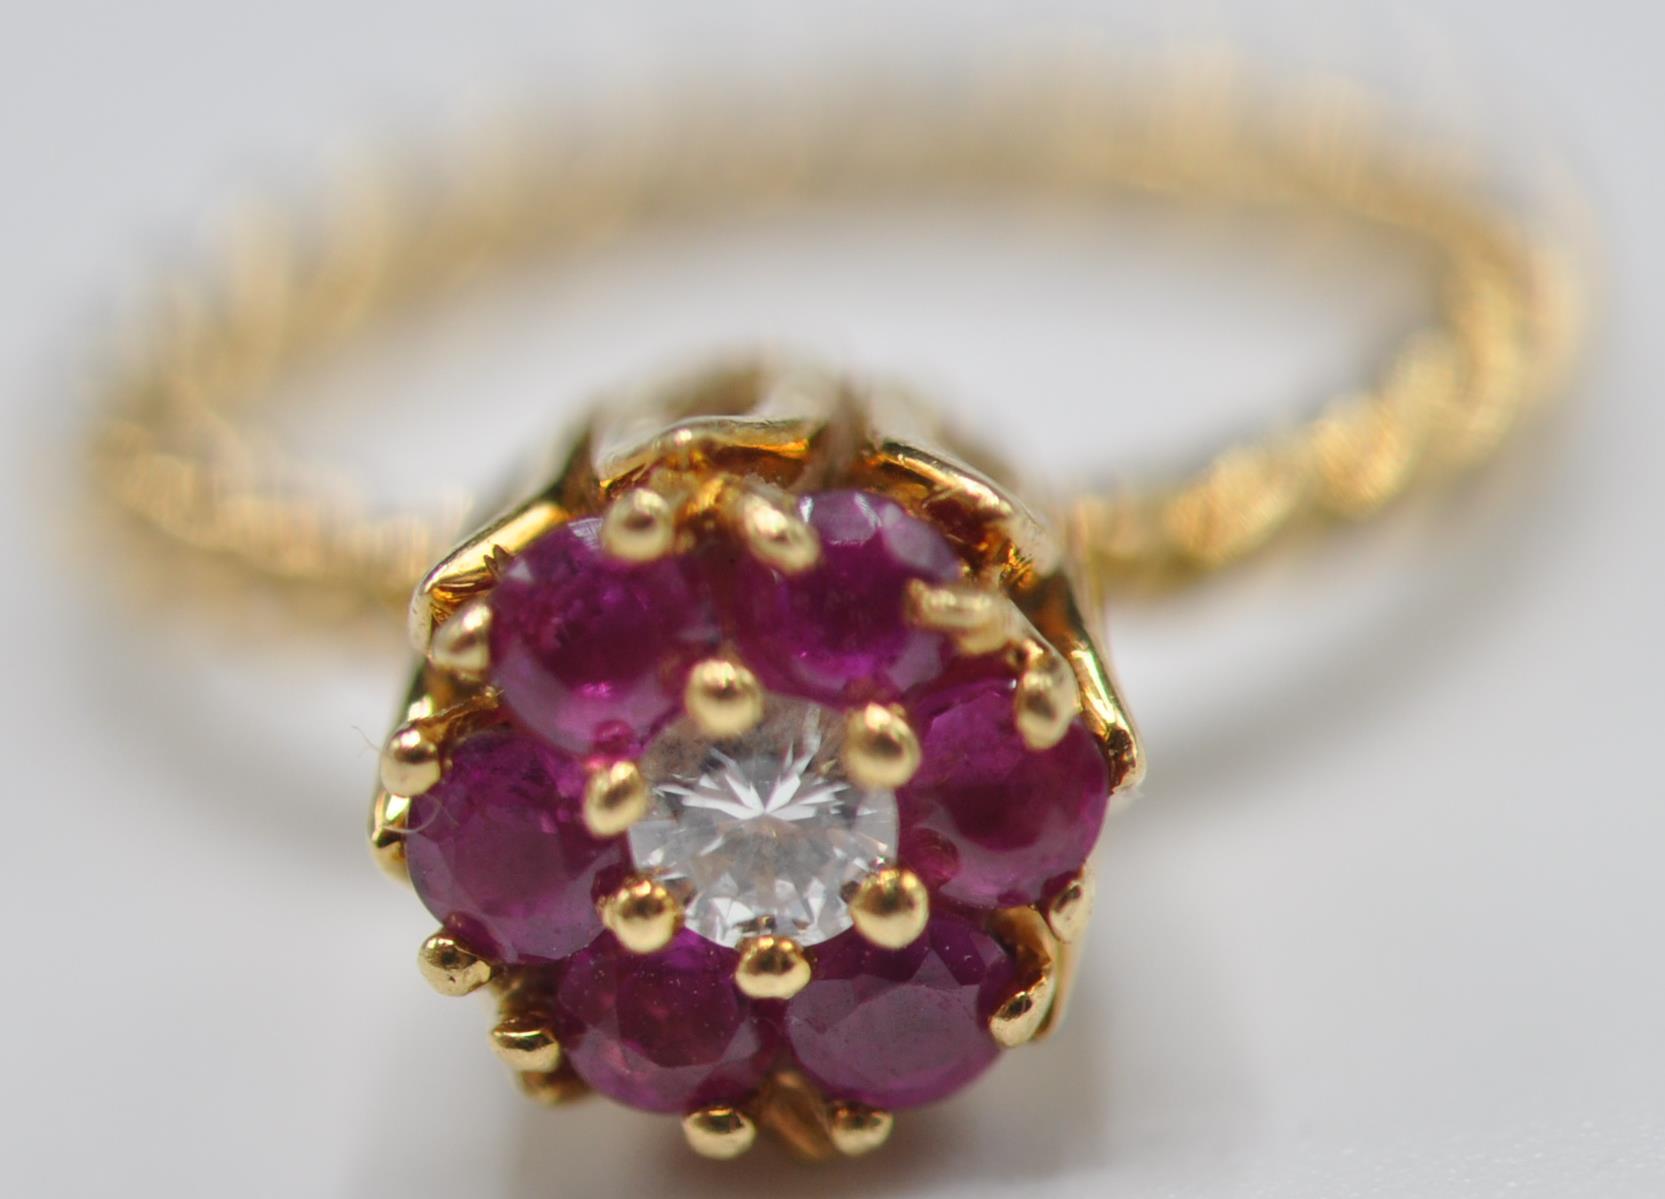 STAMPED 14CT GOLD RING WITH DIAMONDS AND RUBIES - Image 3 of 6